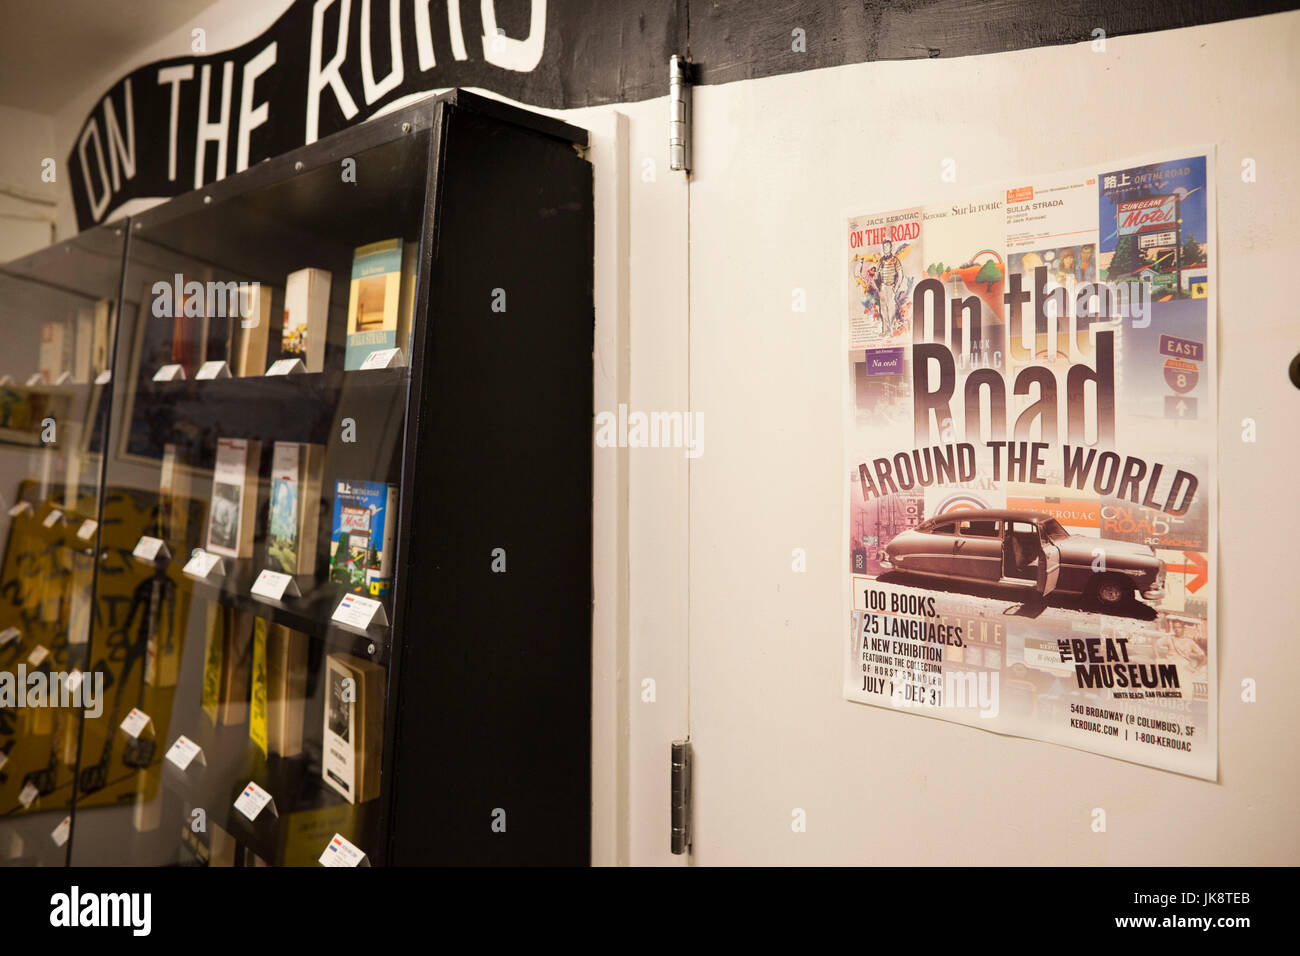 USA, California, San Francisco, North Beach, The Beat Museum, honoring mid-20th century American poets and writers of the Beat movement, display of Jack Kerouac's book 'On the Road', printed in many languages Stock Photo